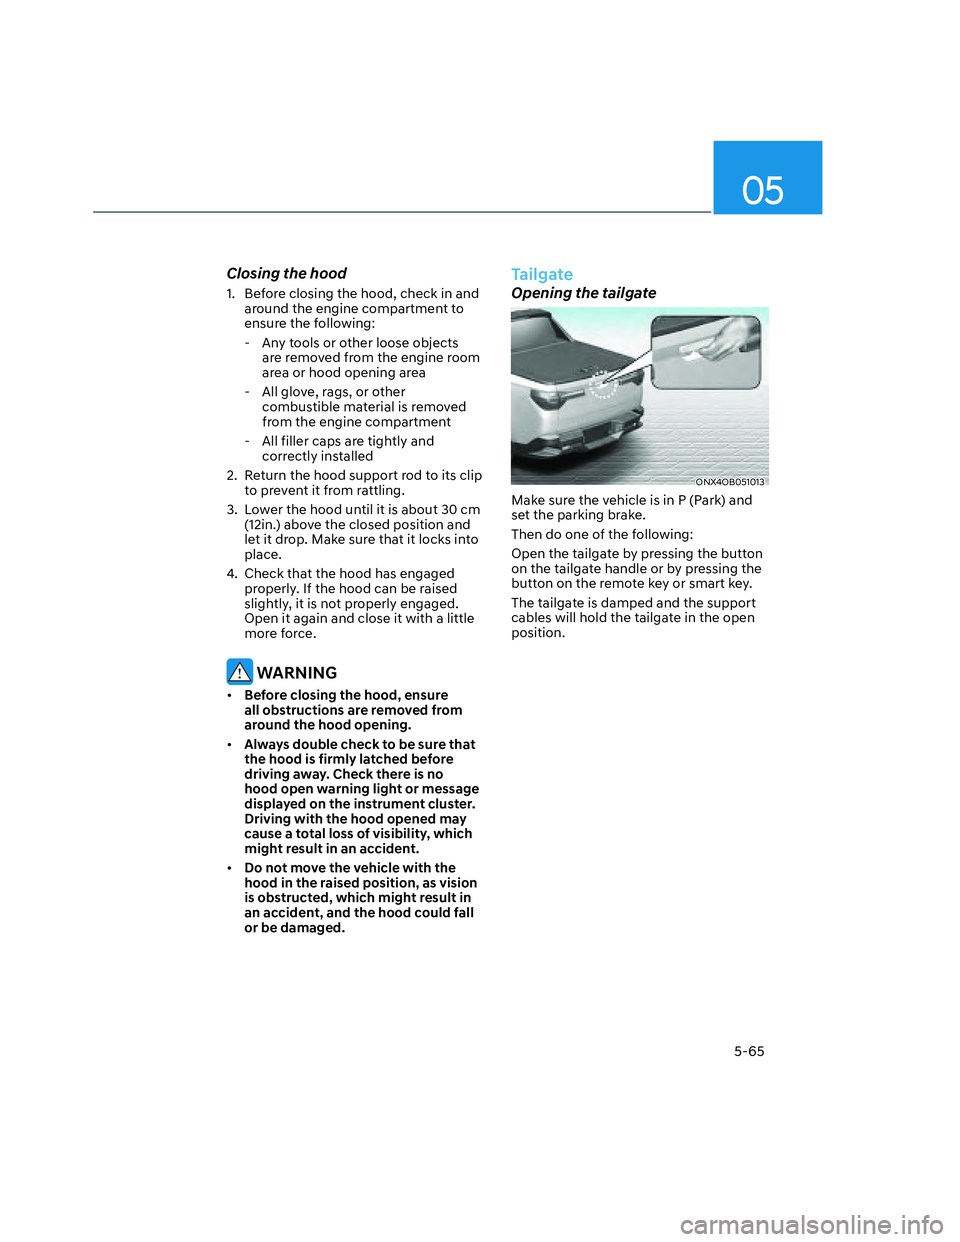 HYUNDAI SANTA CRUZ 2023  Owners Manual 05
5-65
Closing the hood
1.  Before closing the hood, check in and 
around the engine compartment to 
ensure the following:
  - Any tools or other loose objects 
are removed from the engine room 
area